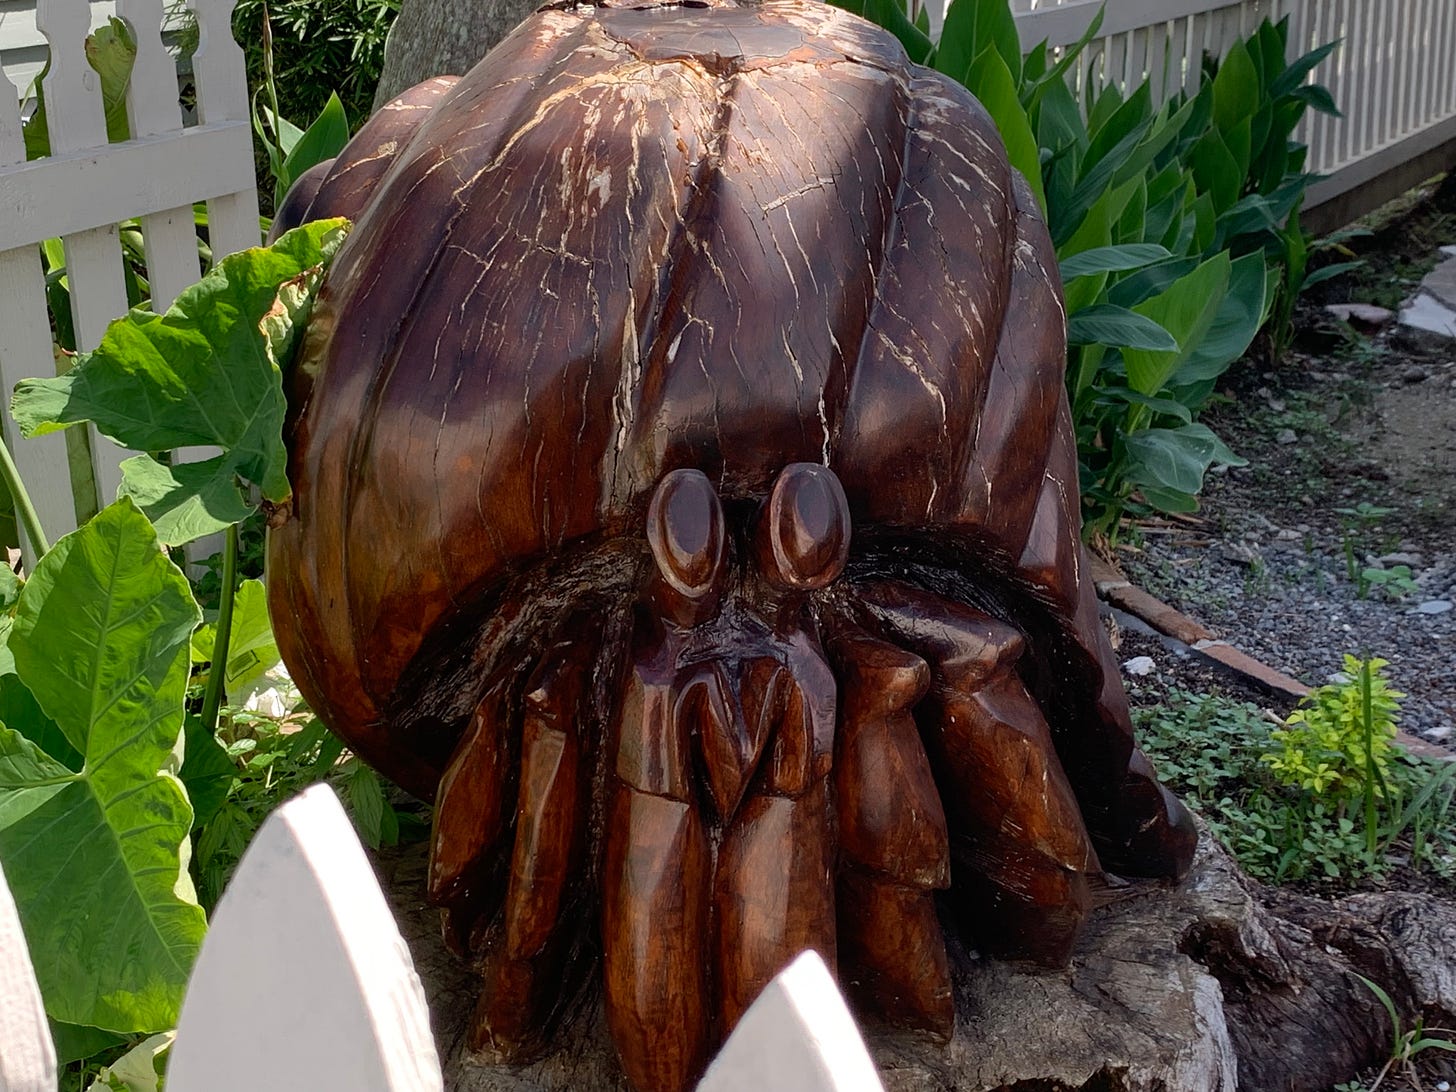 Hermit crab sculpture carved from tree killed in Hurricane Ike